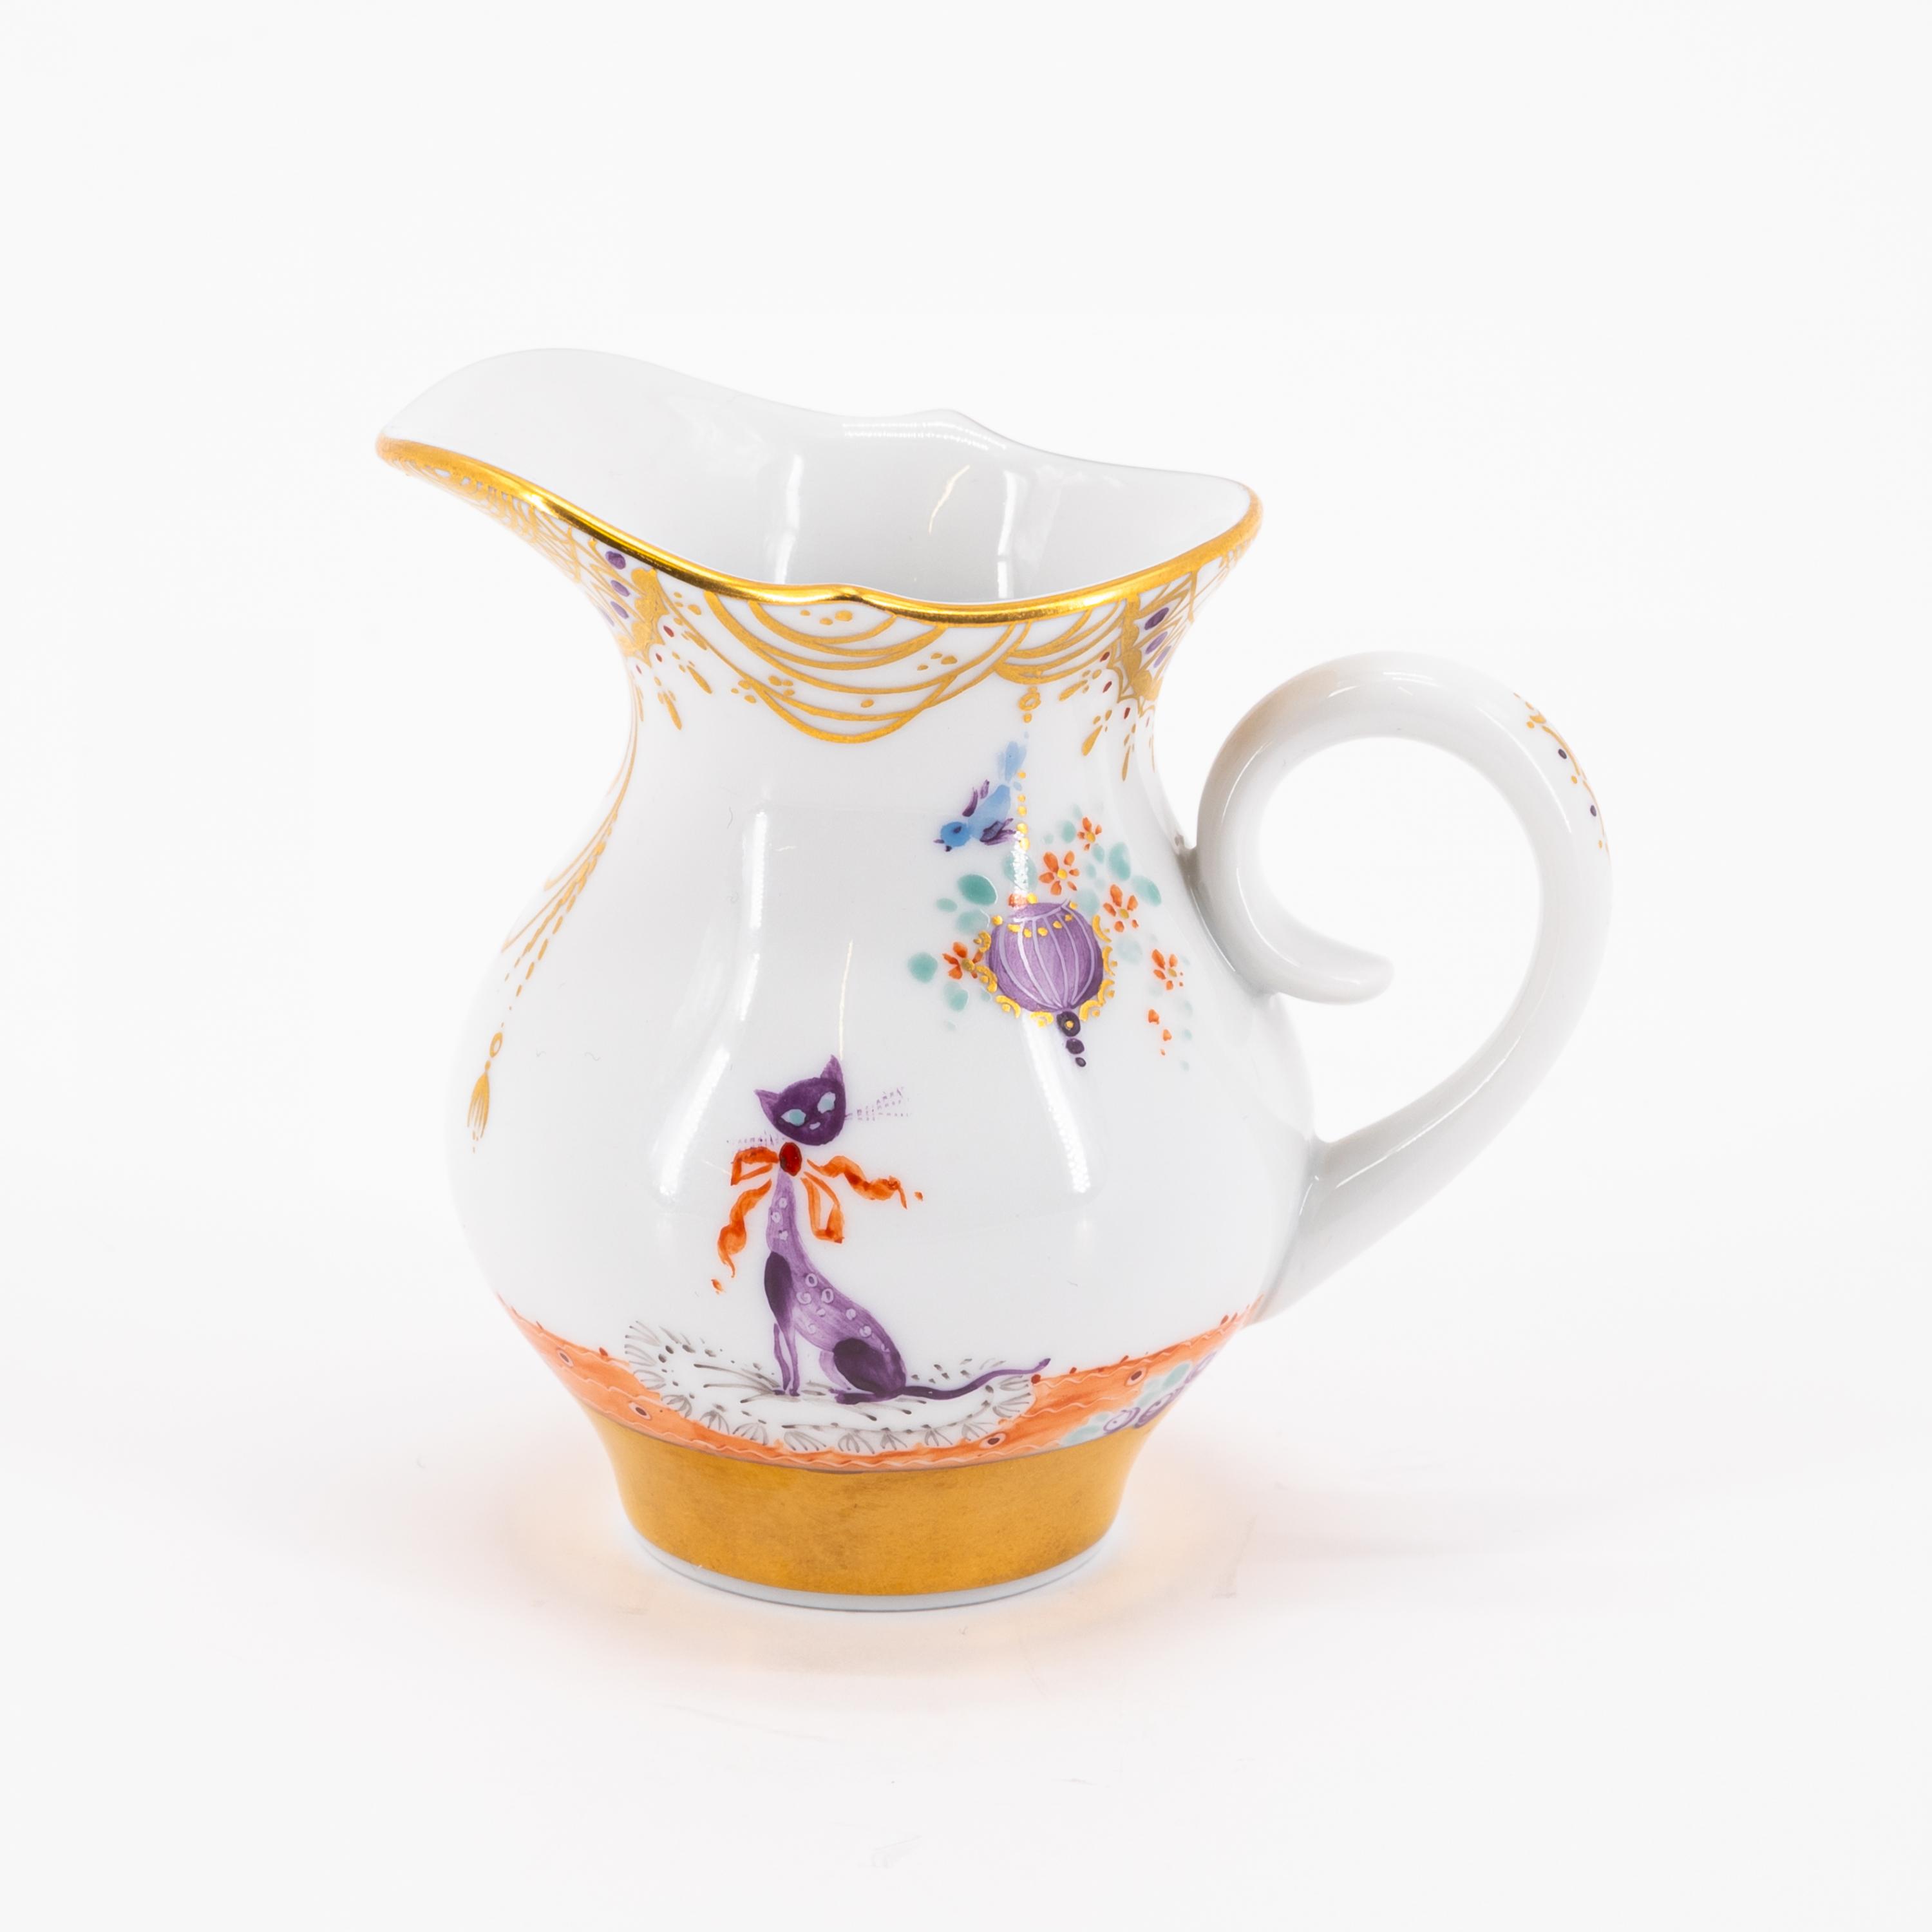 LARGE PORCELAIN COFFEE SERVICE WITH '1001 NIGHTS' DECOR FOR 12 PEOPLE - Image 16 of 19